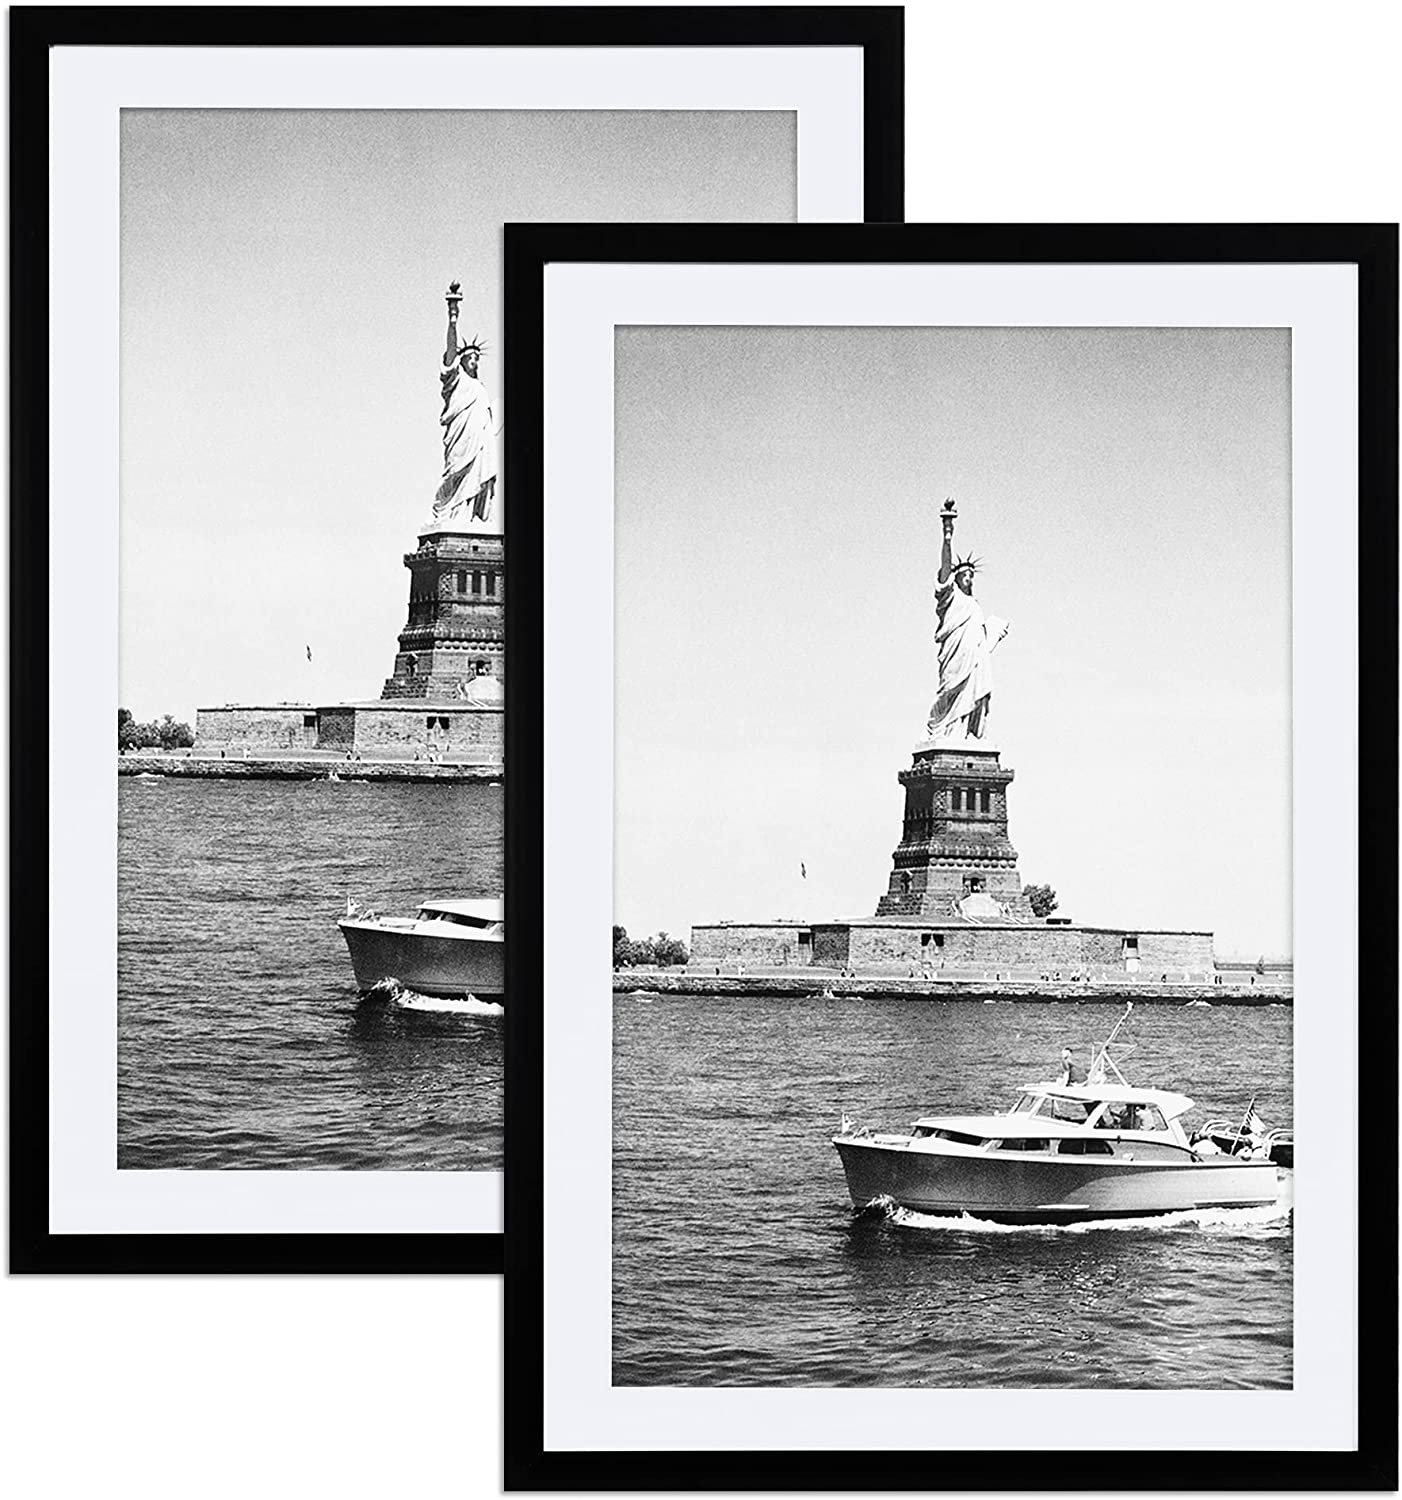 ENJOYBASICS 13x19 Picture Frame Black Poster Frame,Display Pictures 11x17 with Mat or 13x19 Without Mat,Wall Gallery Photo Frames,2 Pack